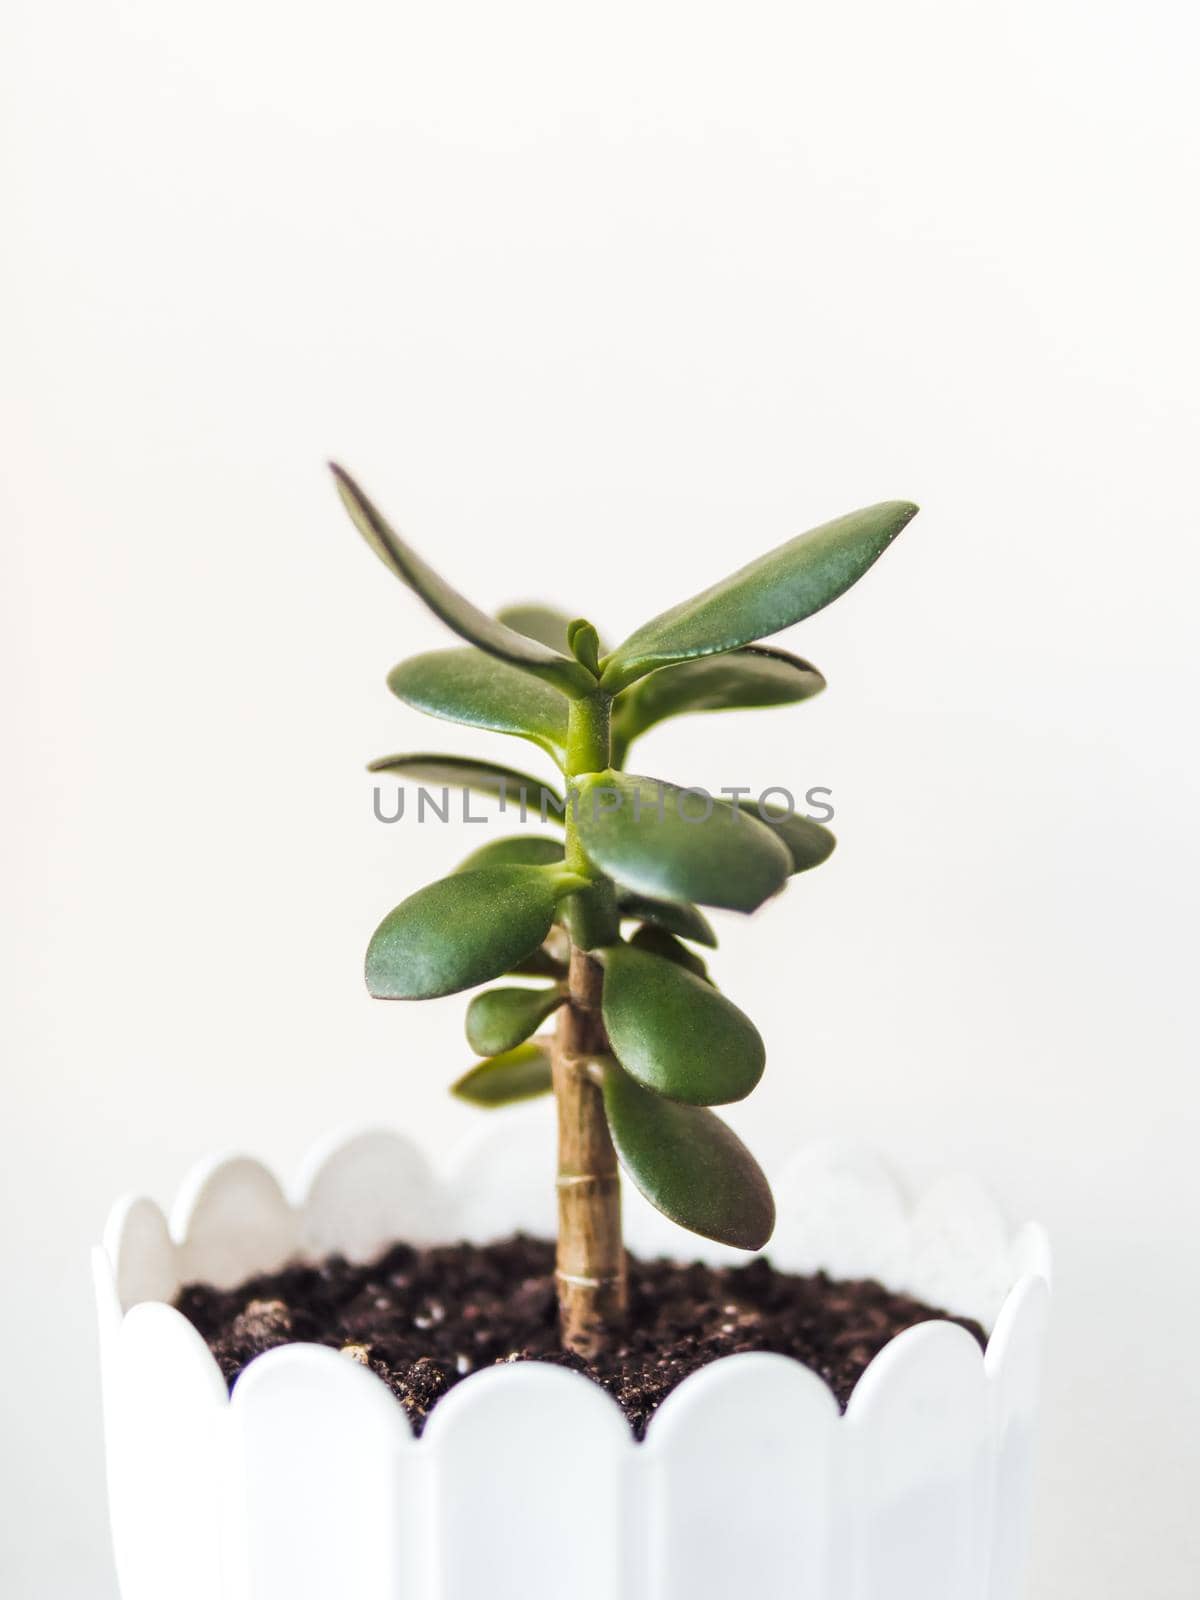 Flower pot with Crassula. Succulent plant on white background. Green leaves of money tree, symbol of luck. Peaceful botanical hobby. Gardening at home.